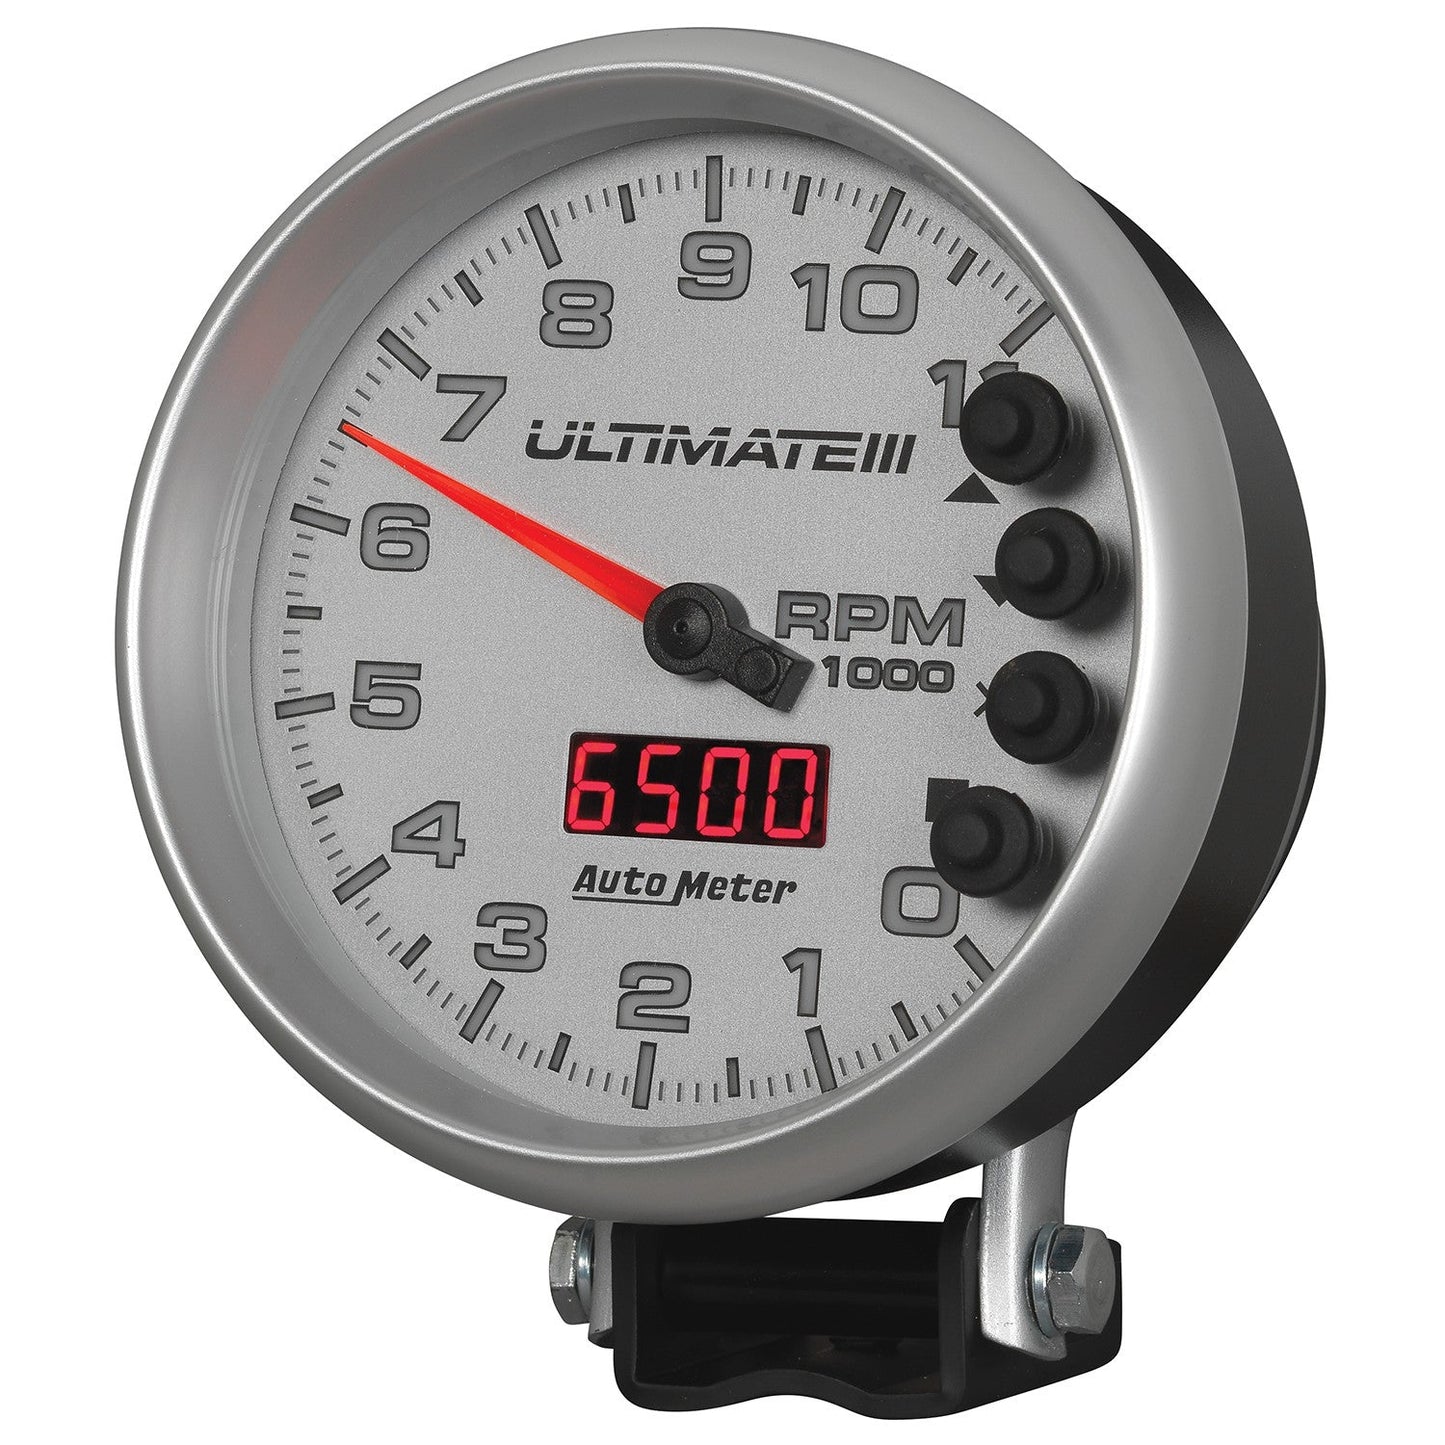 AutoMeter - 5" TACHOMETER, 0-11,000 RPM, PEDESTAL, ULTIMATE III PLAYBACK, SILVER (6886)